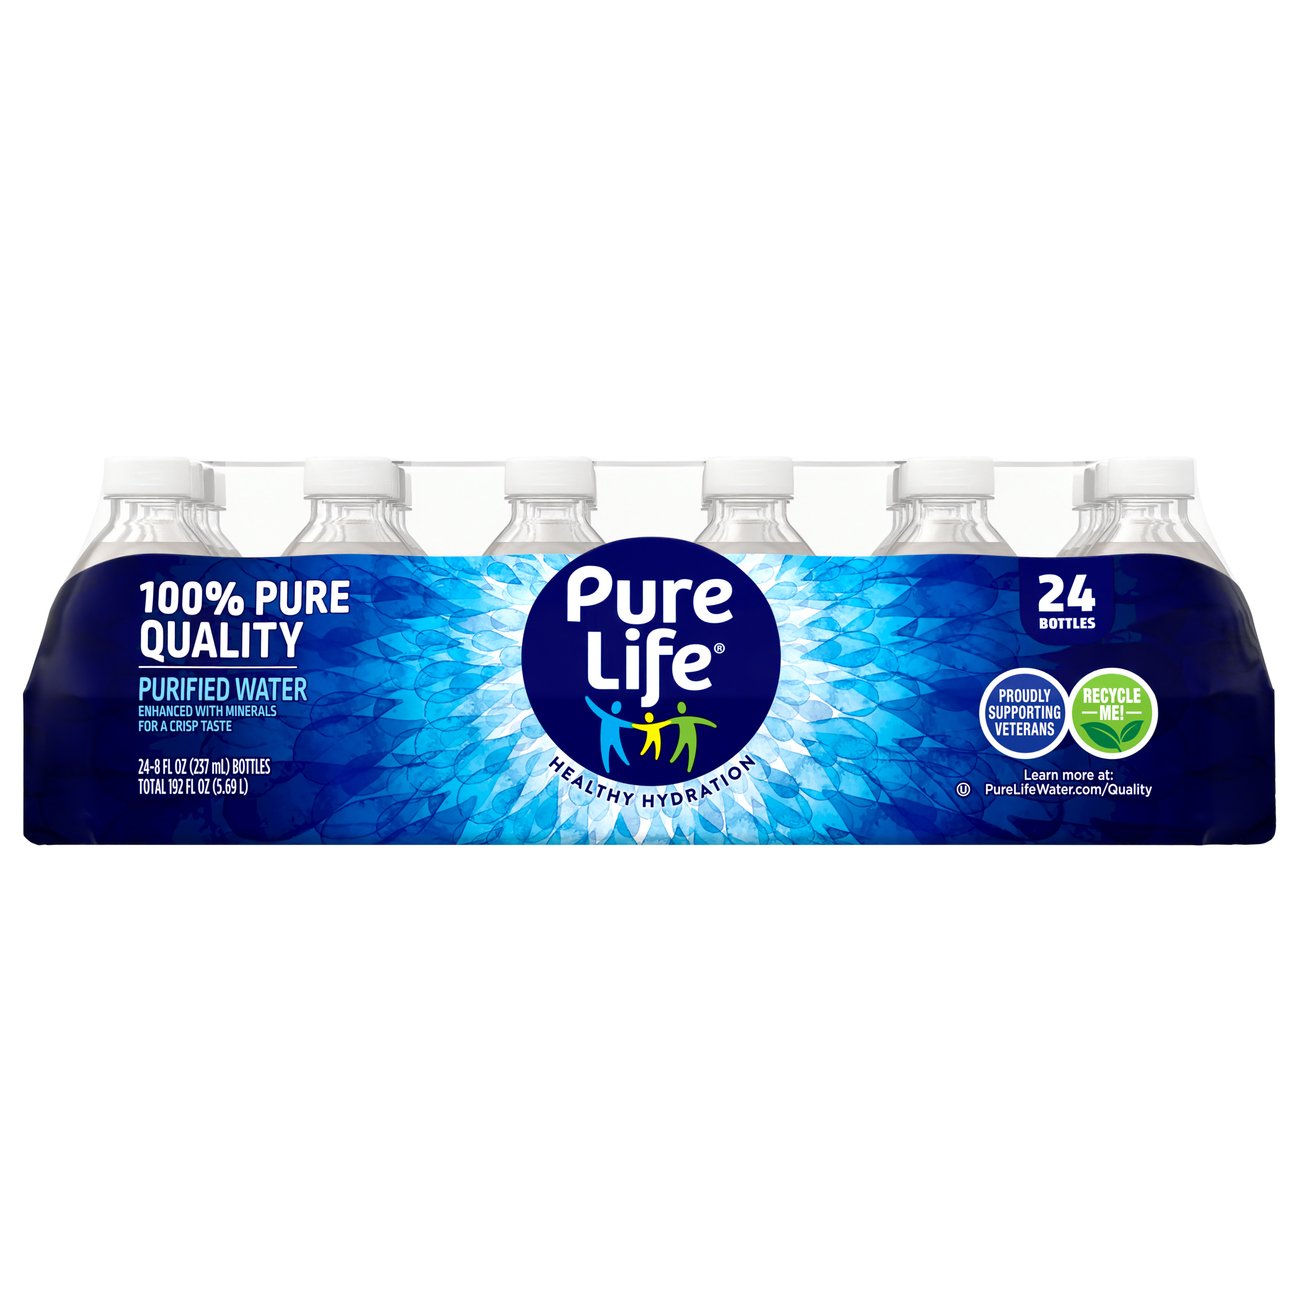 Nestle Pure Life Purified Water, 16.9 Fl. Oz., 12 Count 